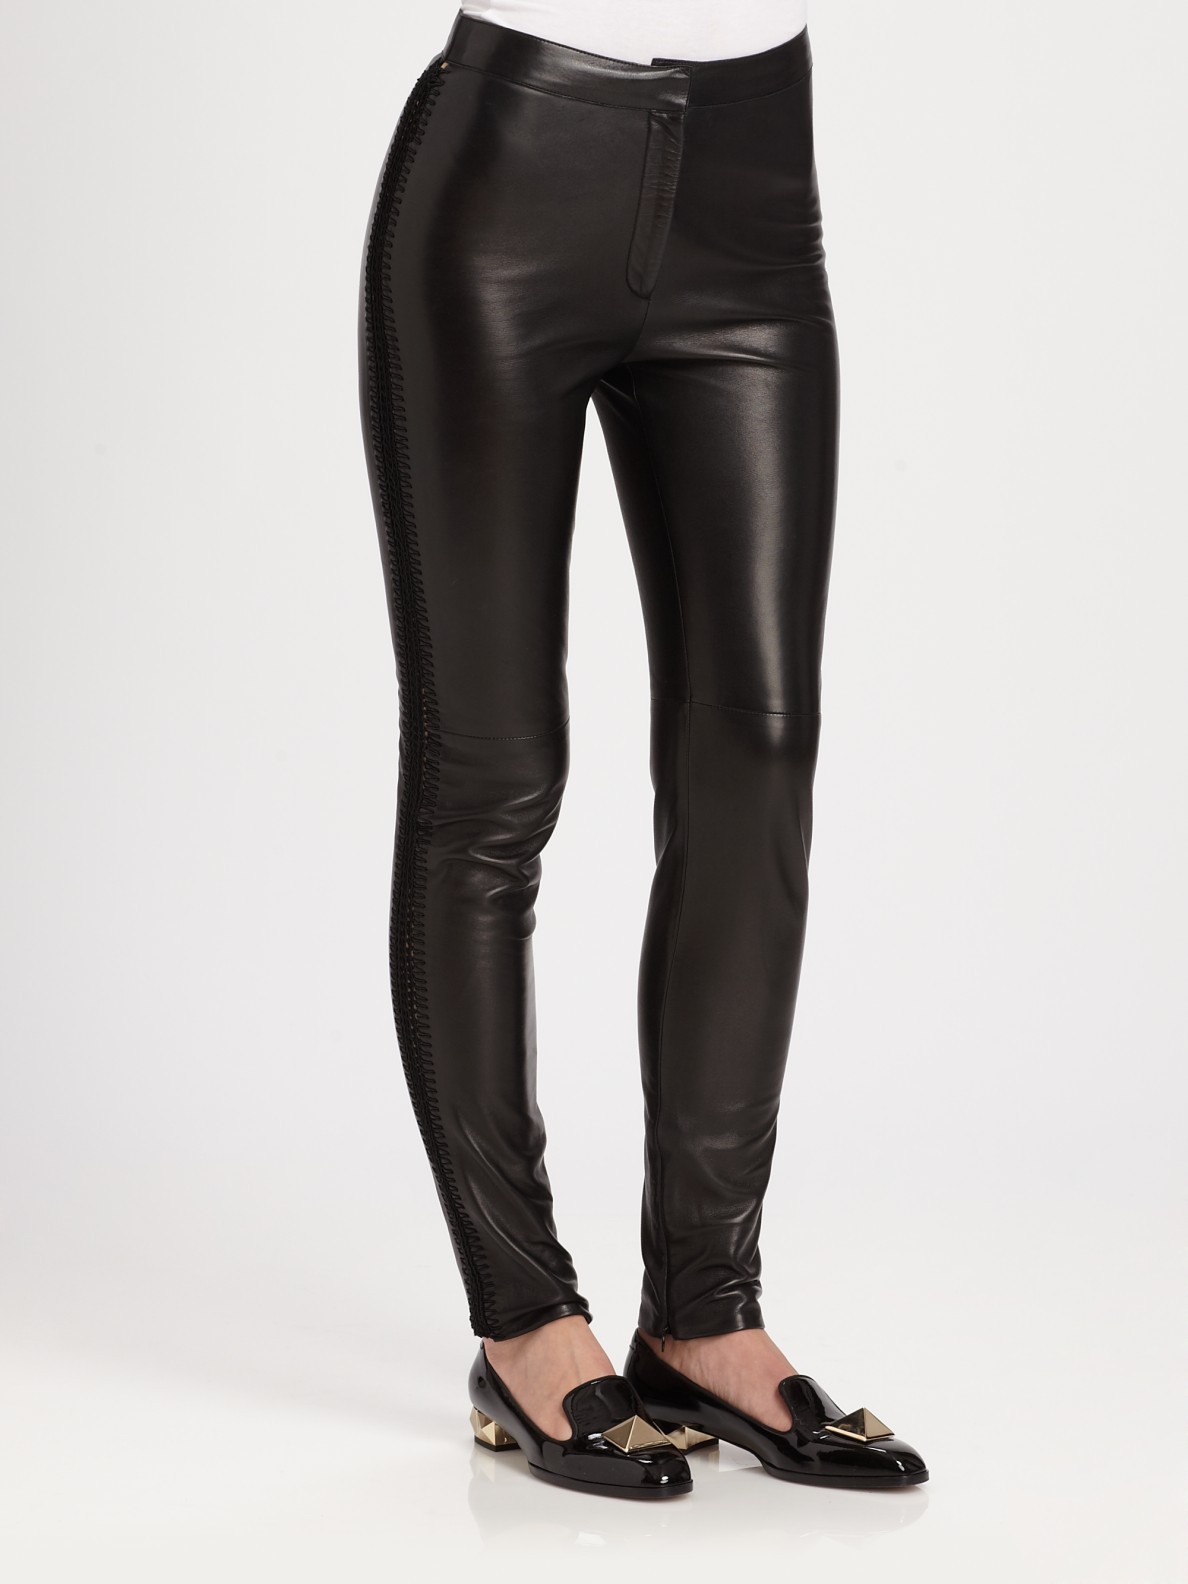 Valentino Embroidered Leather Pants in Black - Lyst